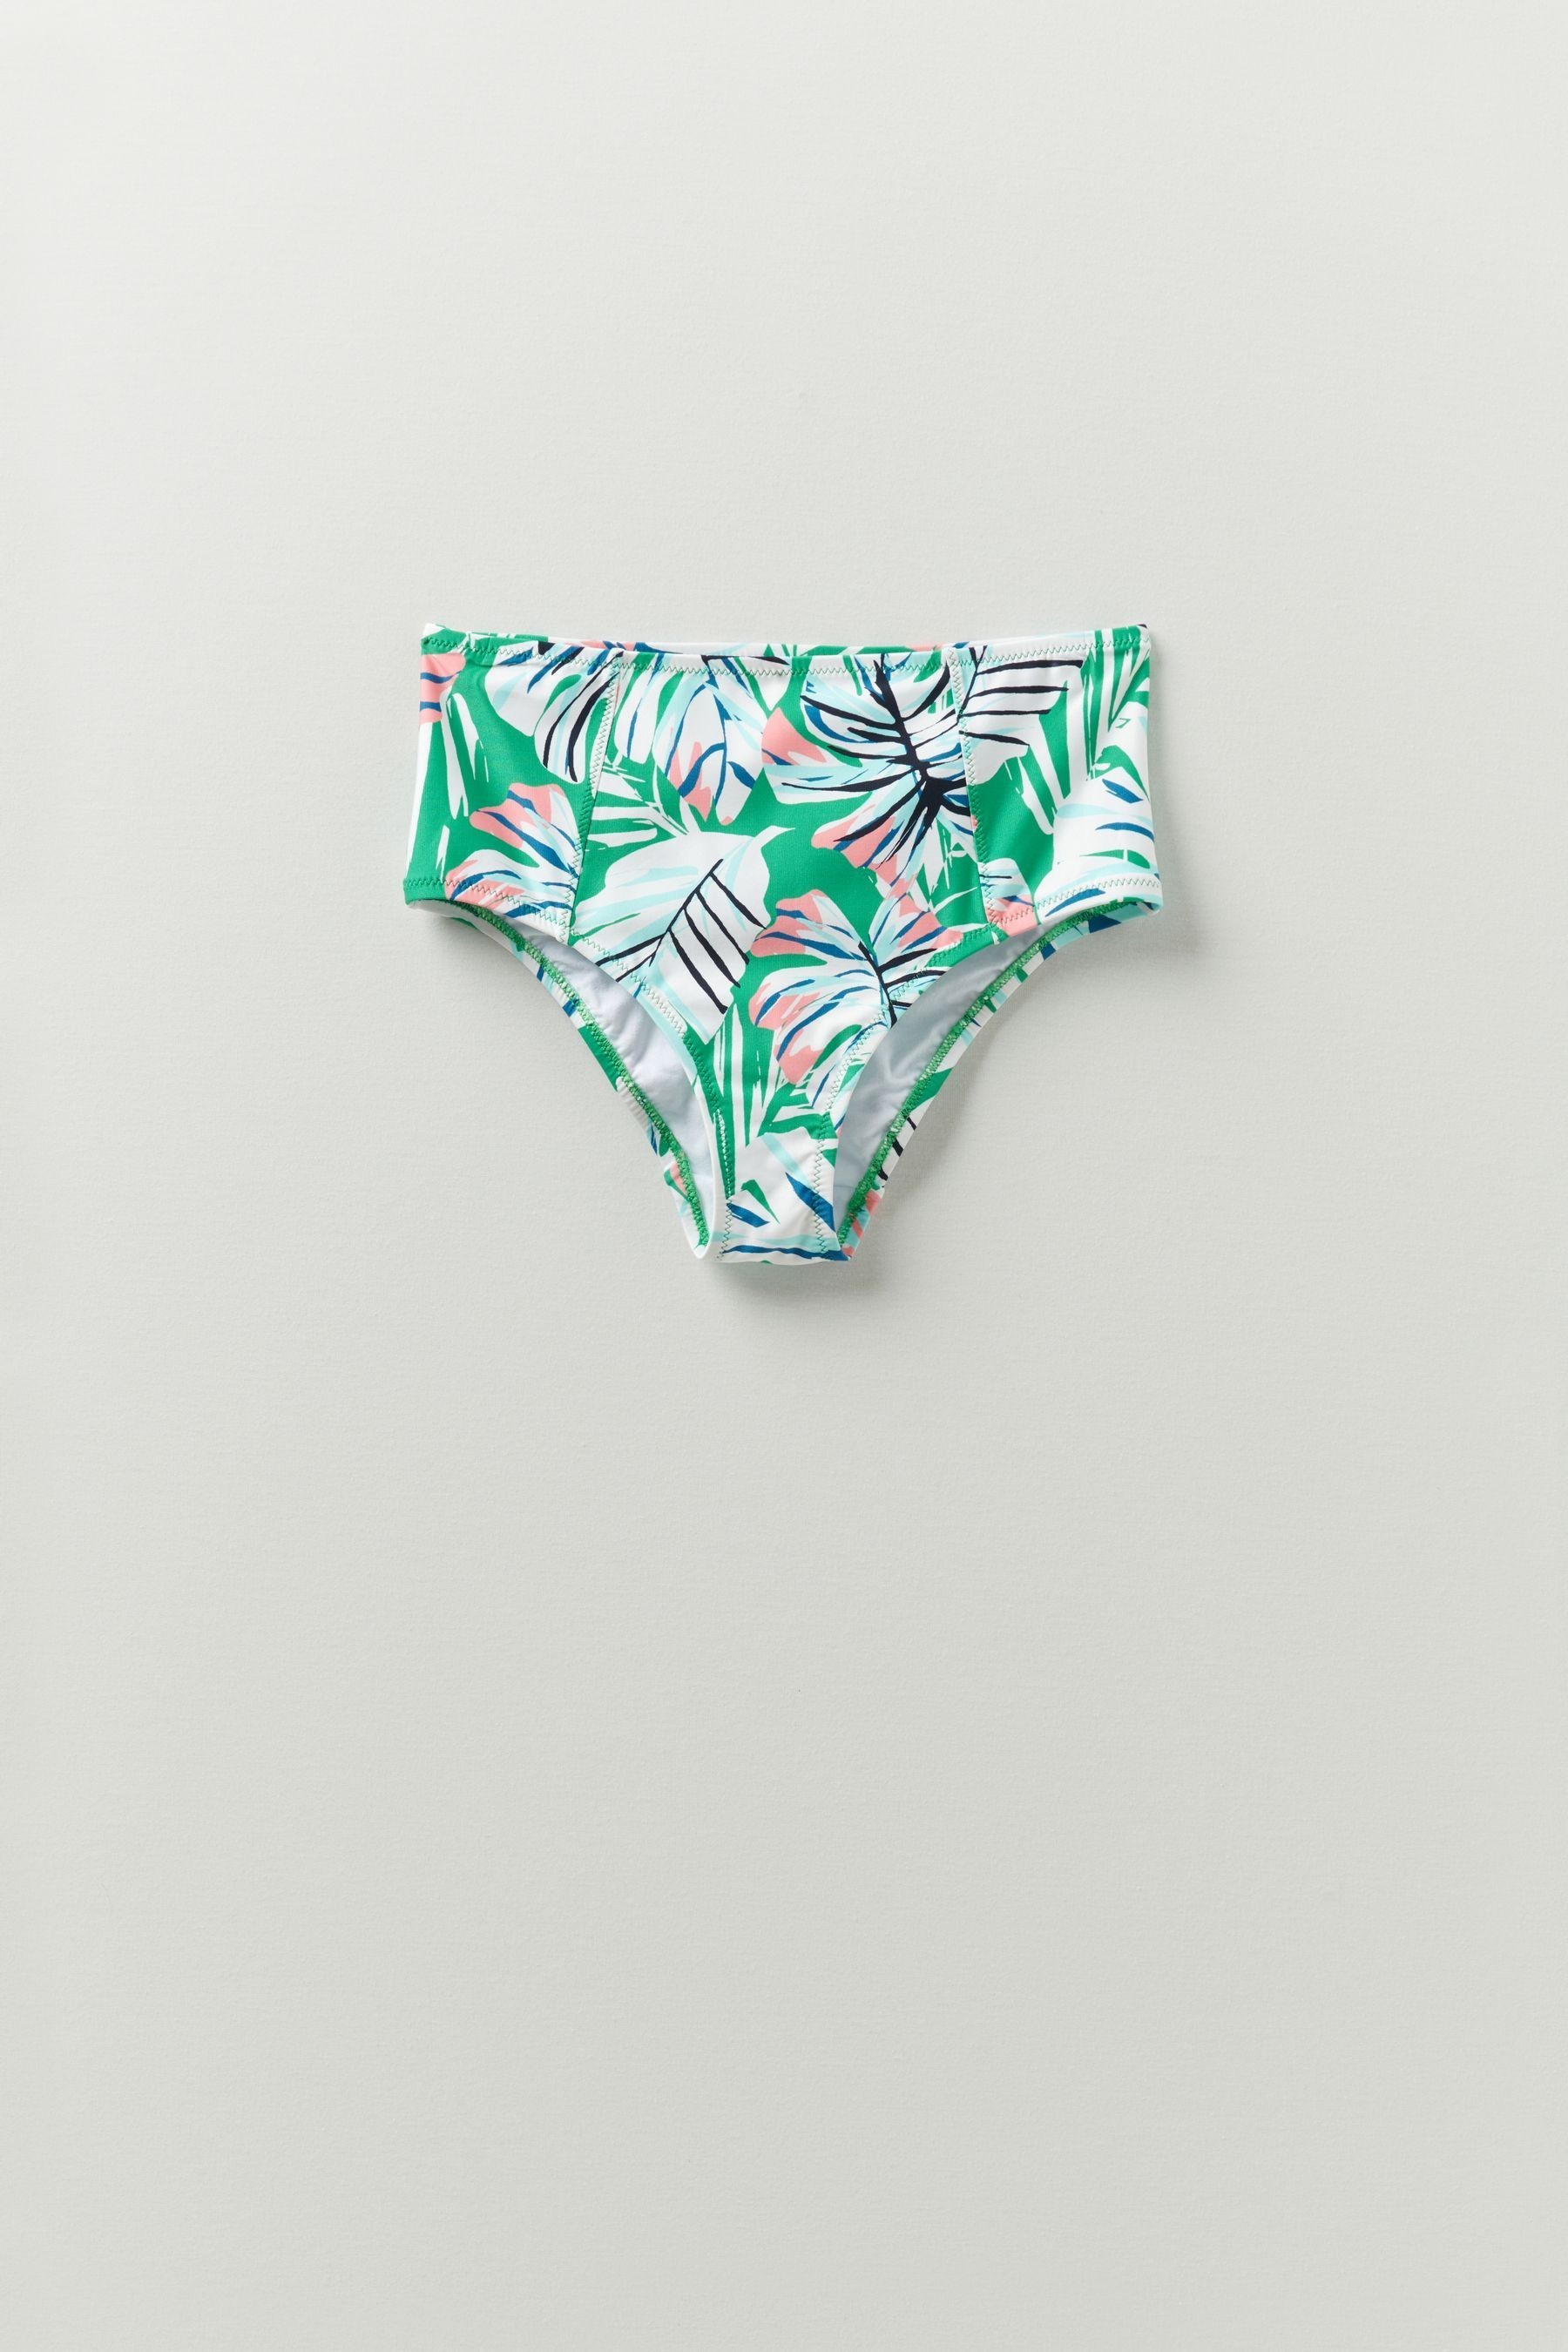 Crew Clothing Company Green Palm High Waisted Briefs